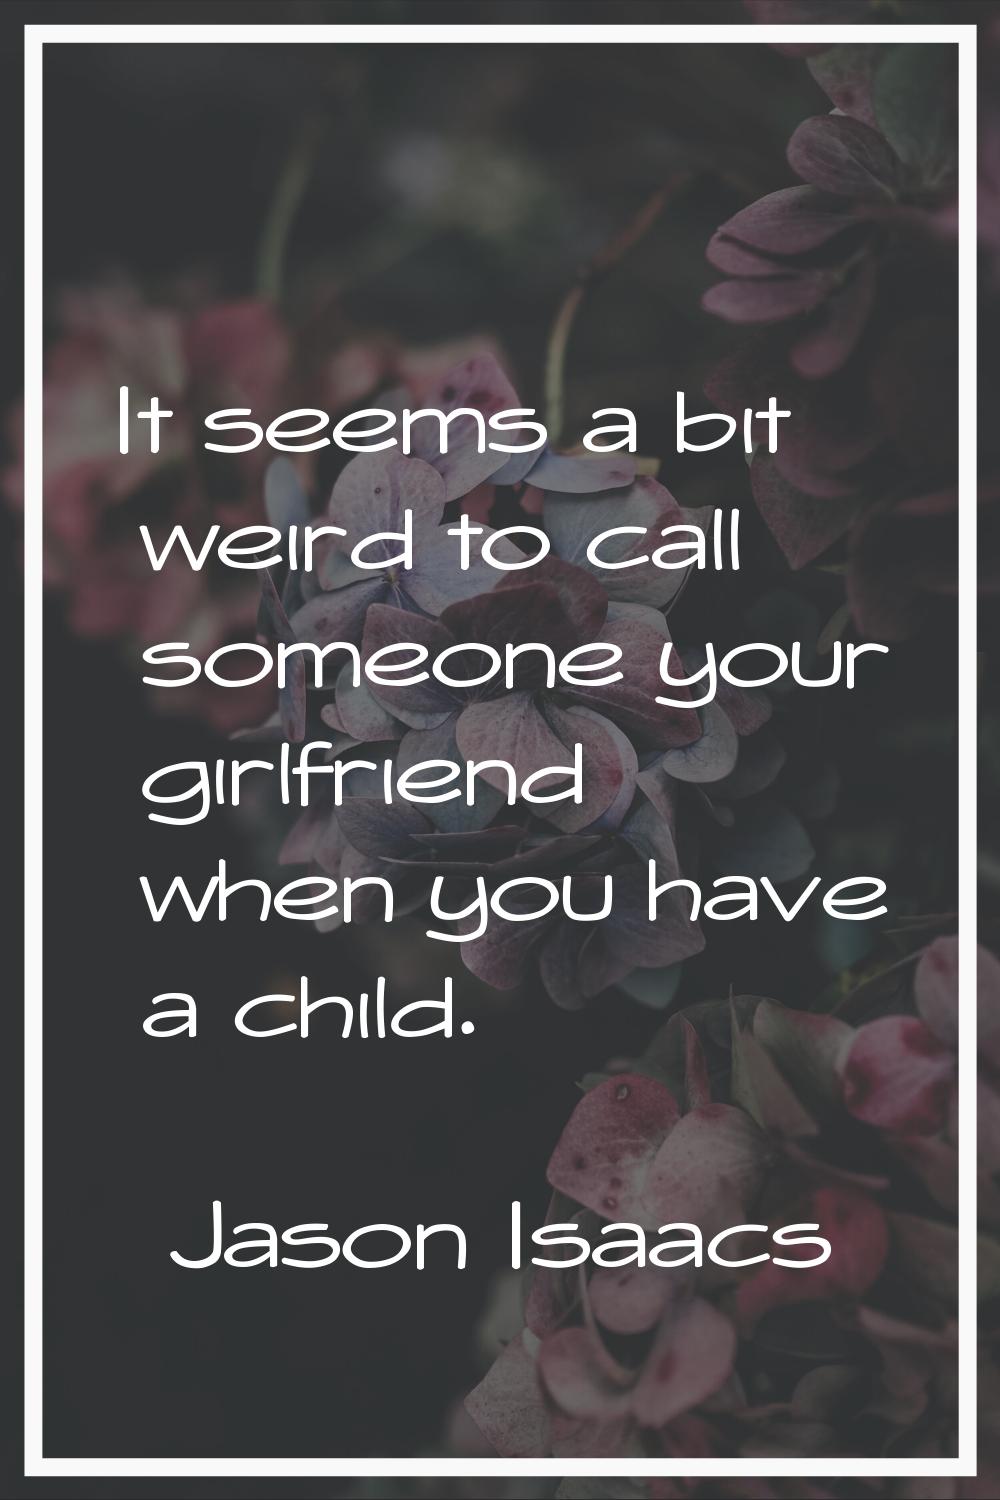 It seems a bit weird to call someone your girlfriend when you have a child.